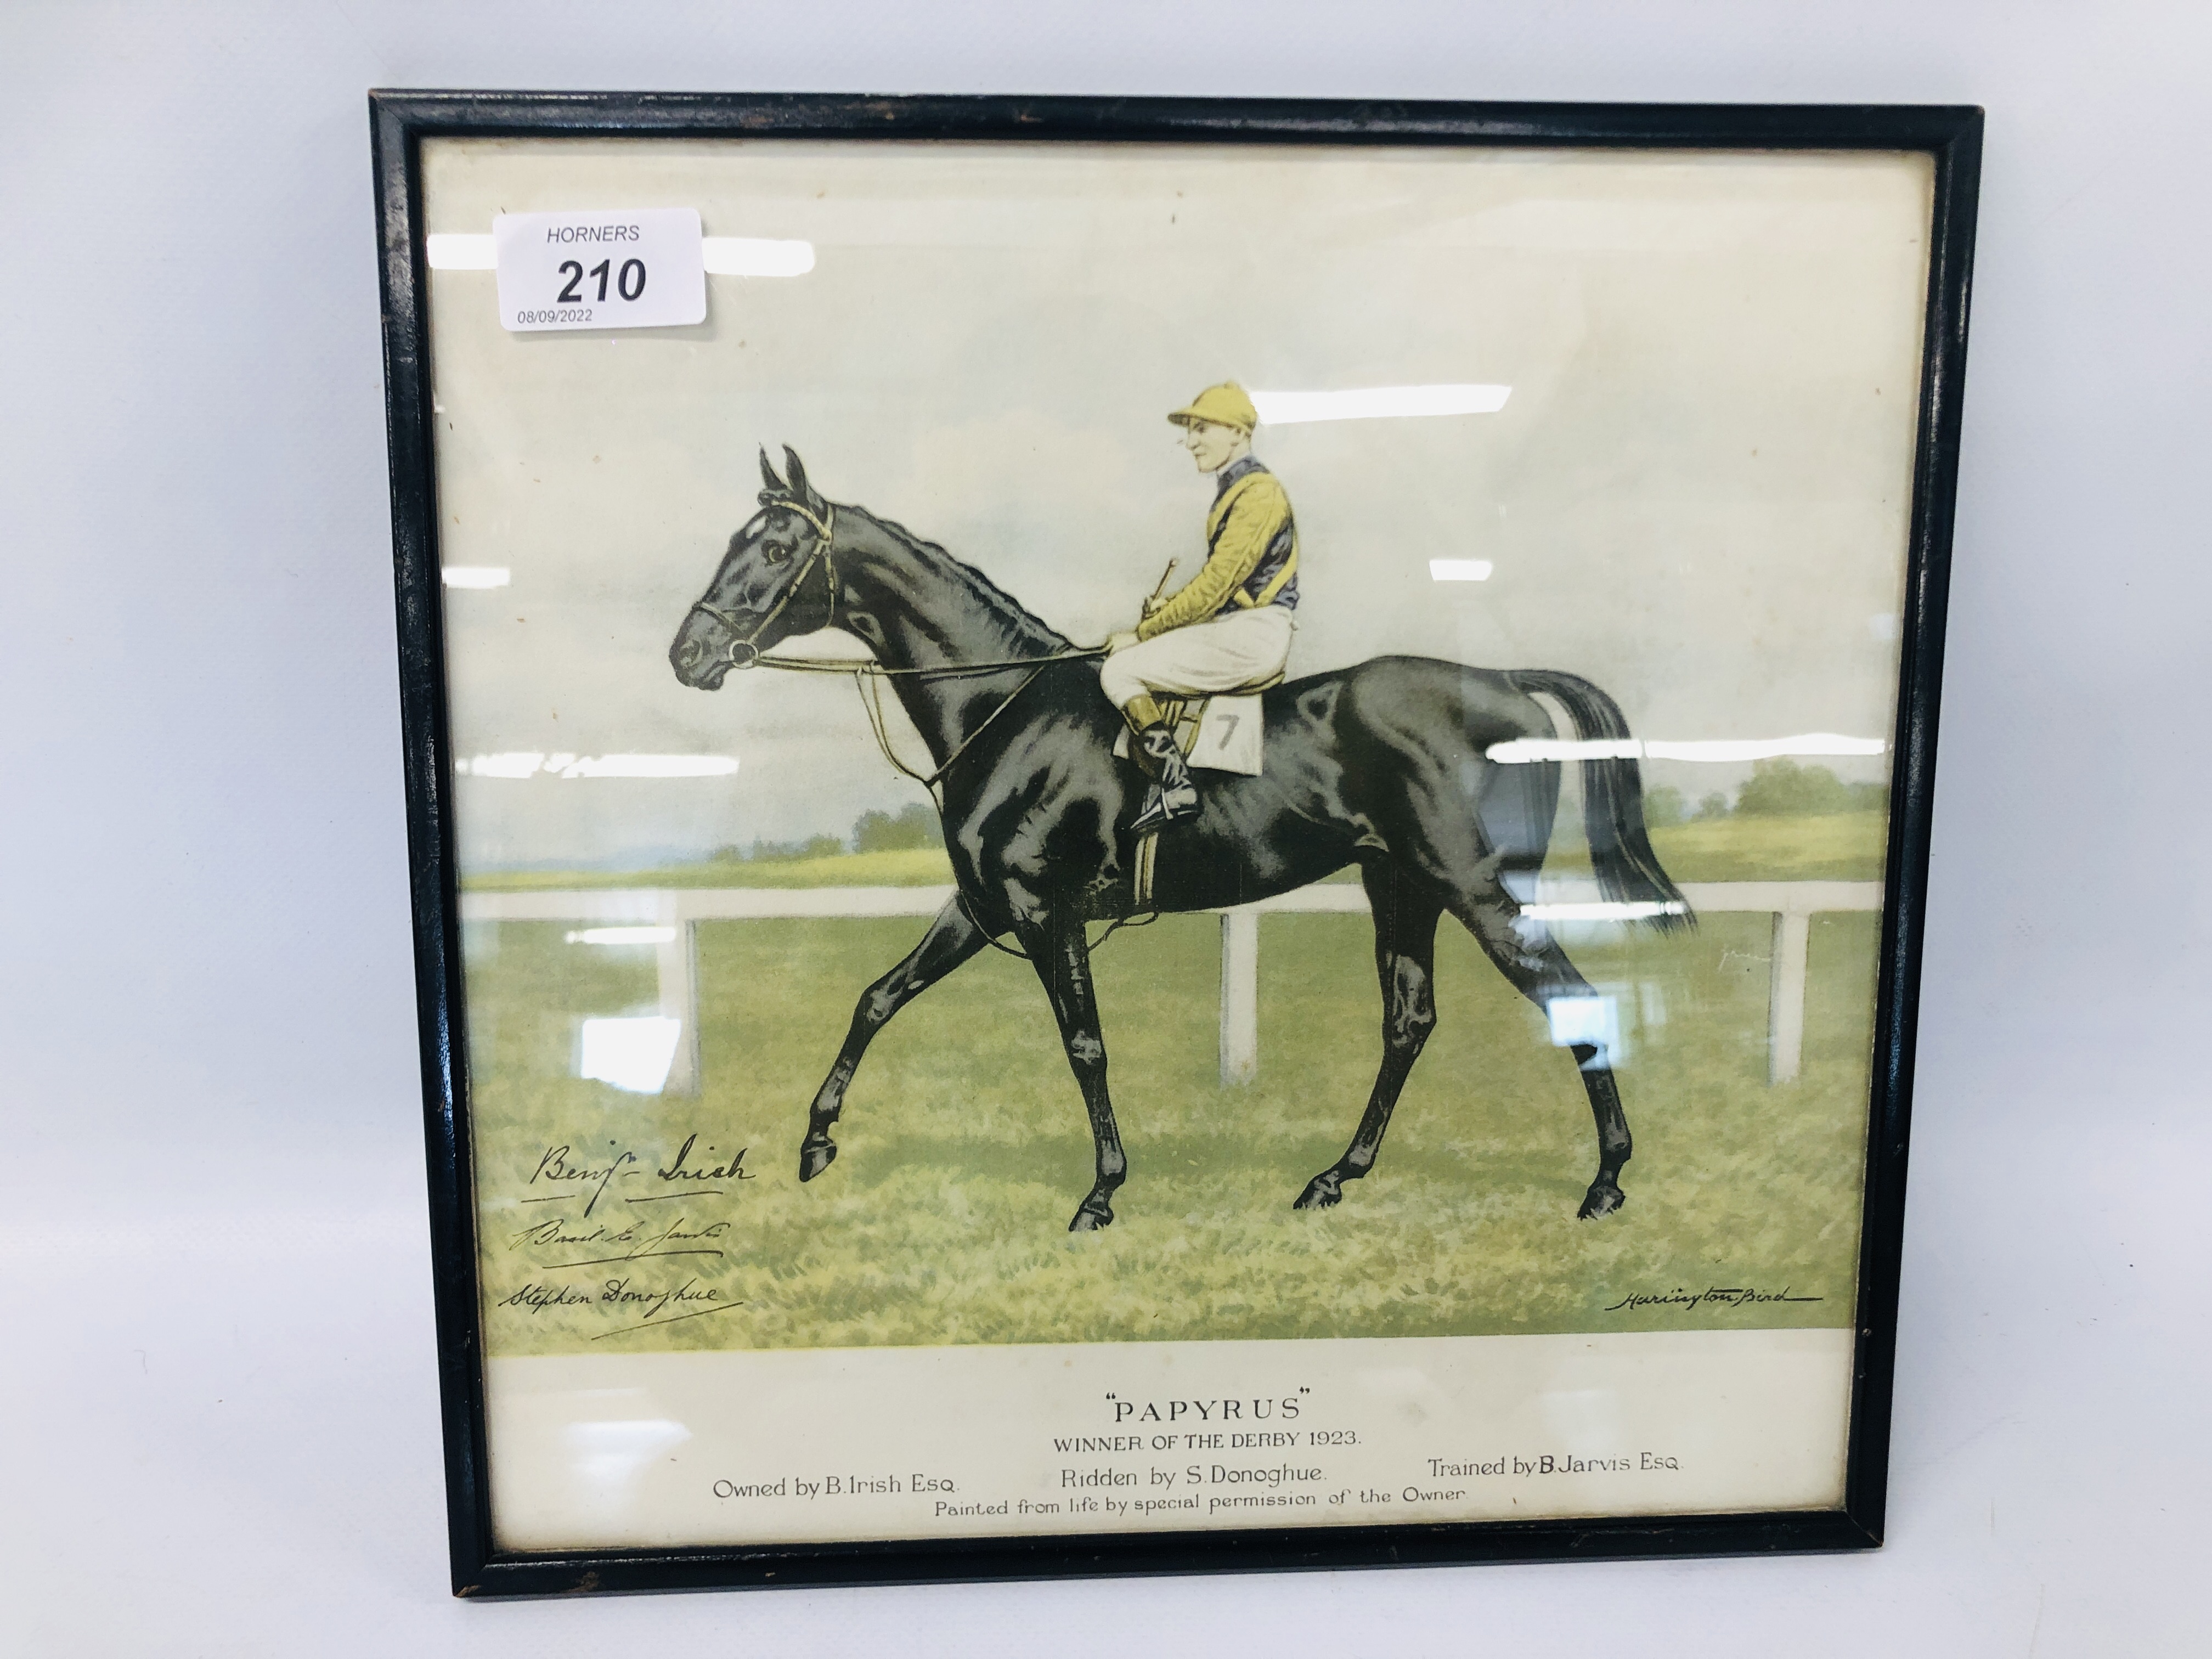 A FRAMED AND MOUNTED PRINT "PAPYRUS" WINNER OF THE DERBY 1923 RIDDEN BY DONOGHUE BEARING SIGNATURE